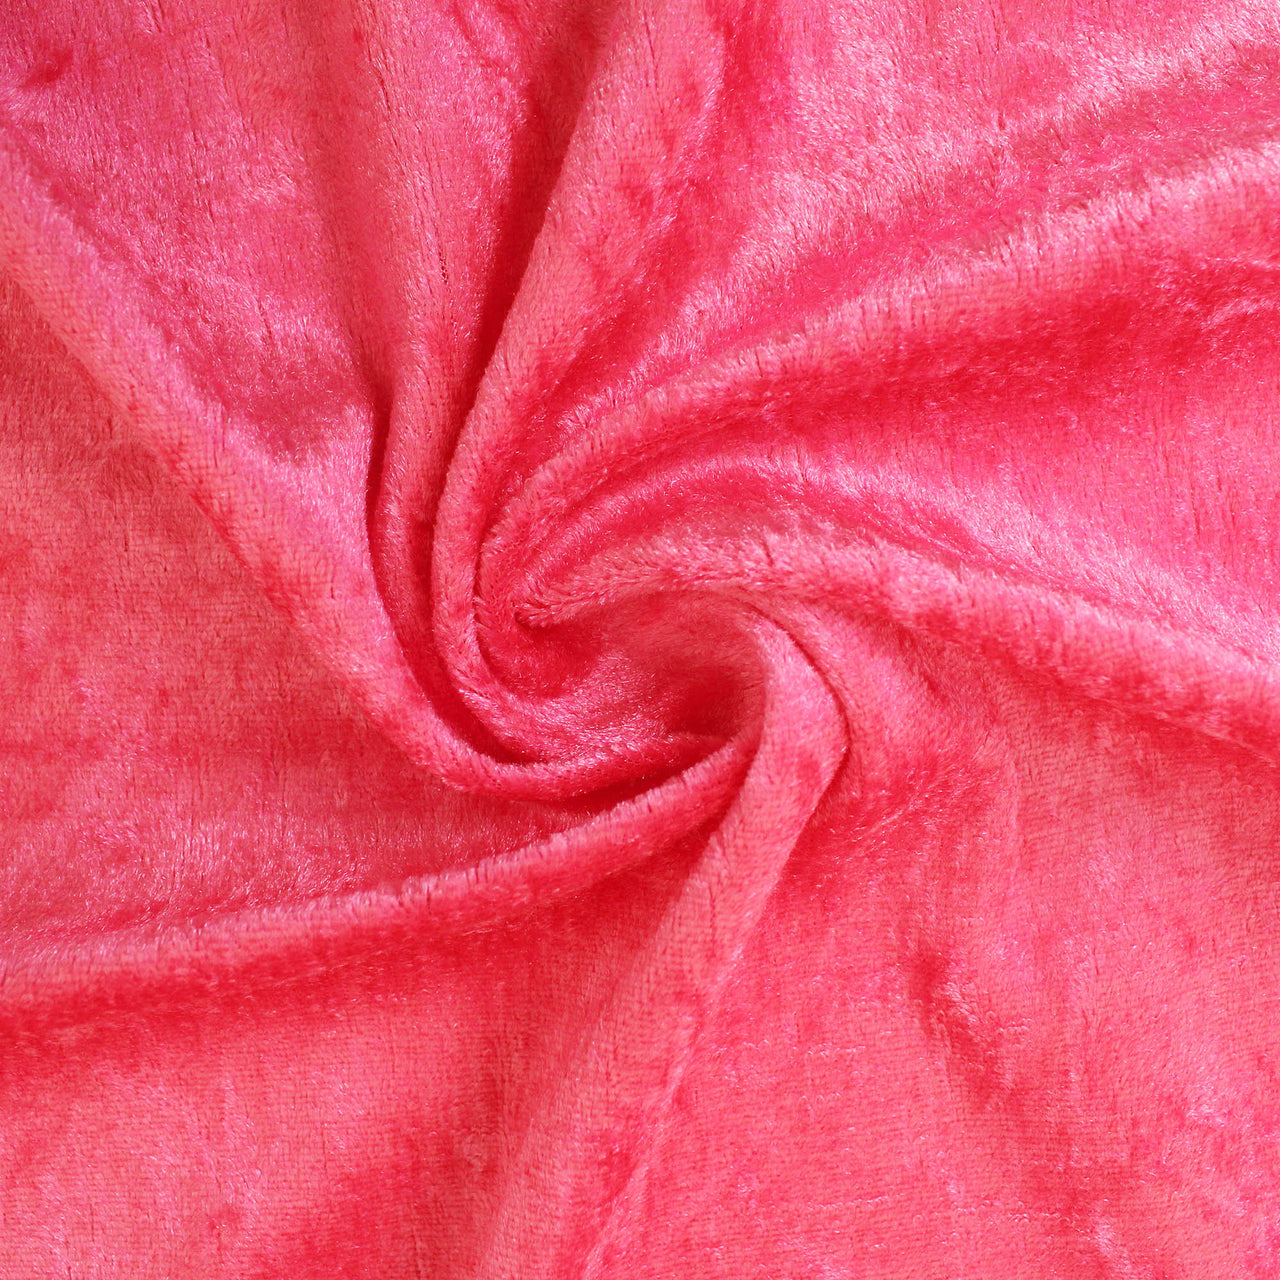 Cerise - Crushed Velvet Velour Fabric - Natural One Way Stretch For Costumes & Drapes